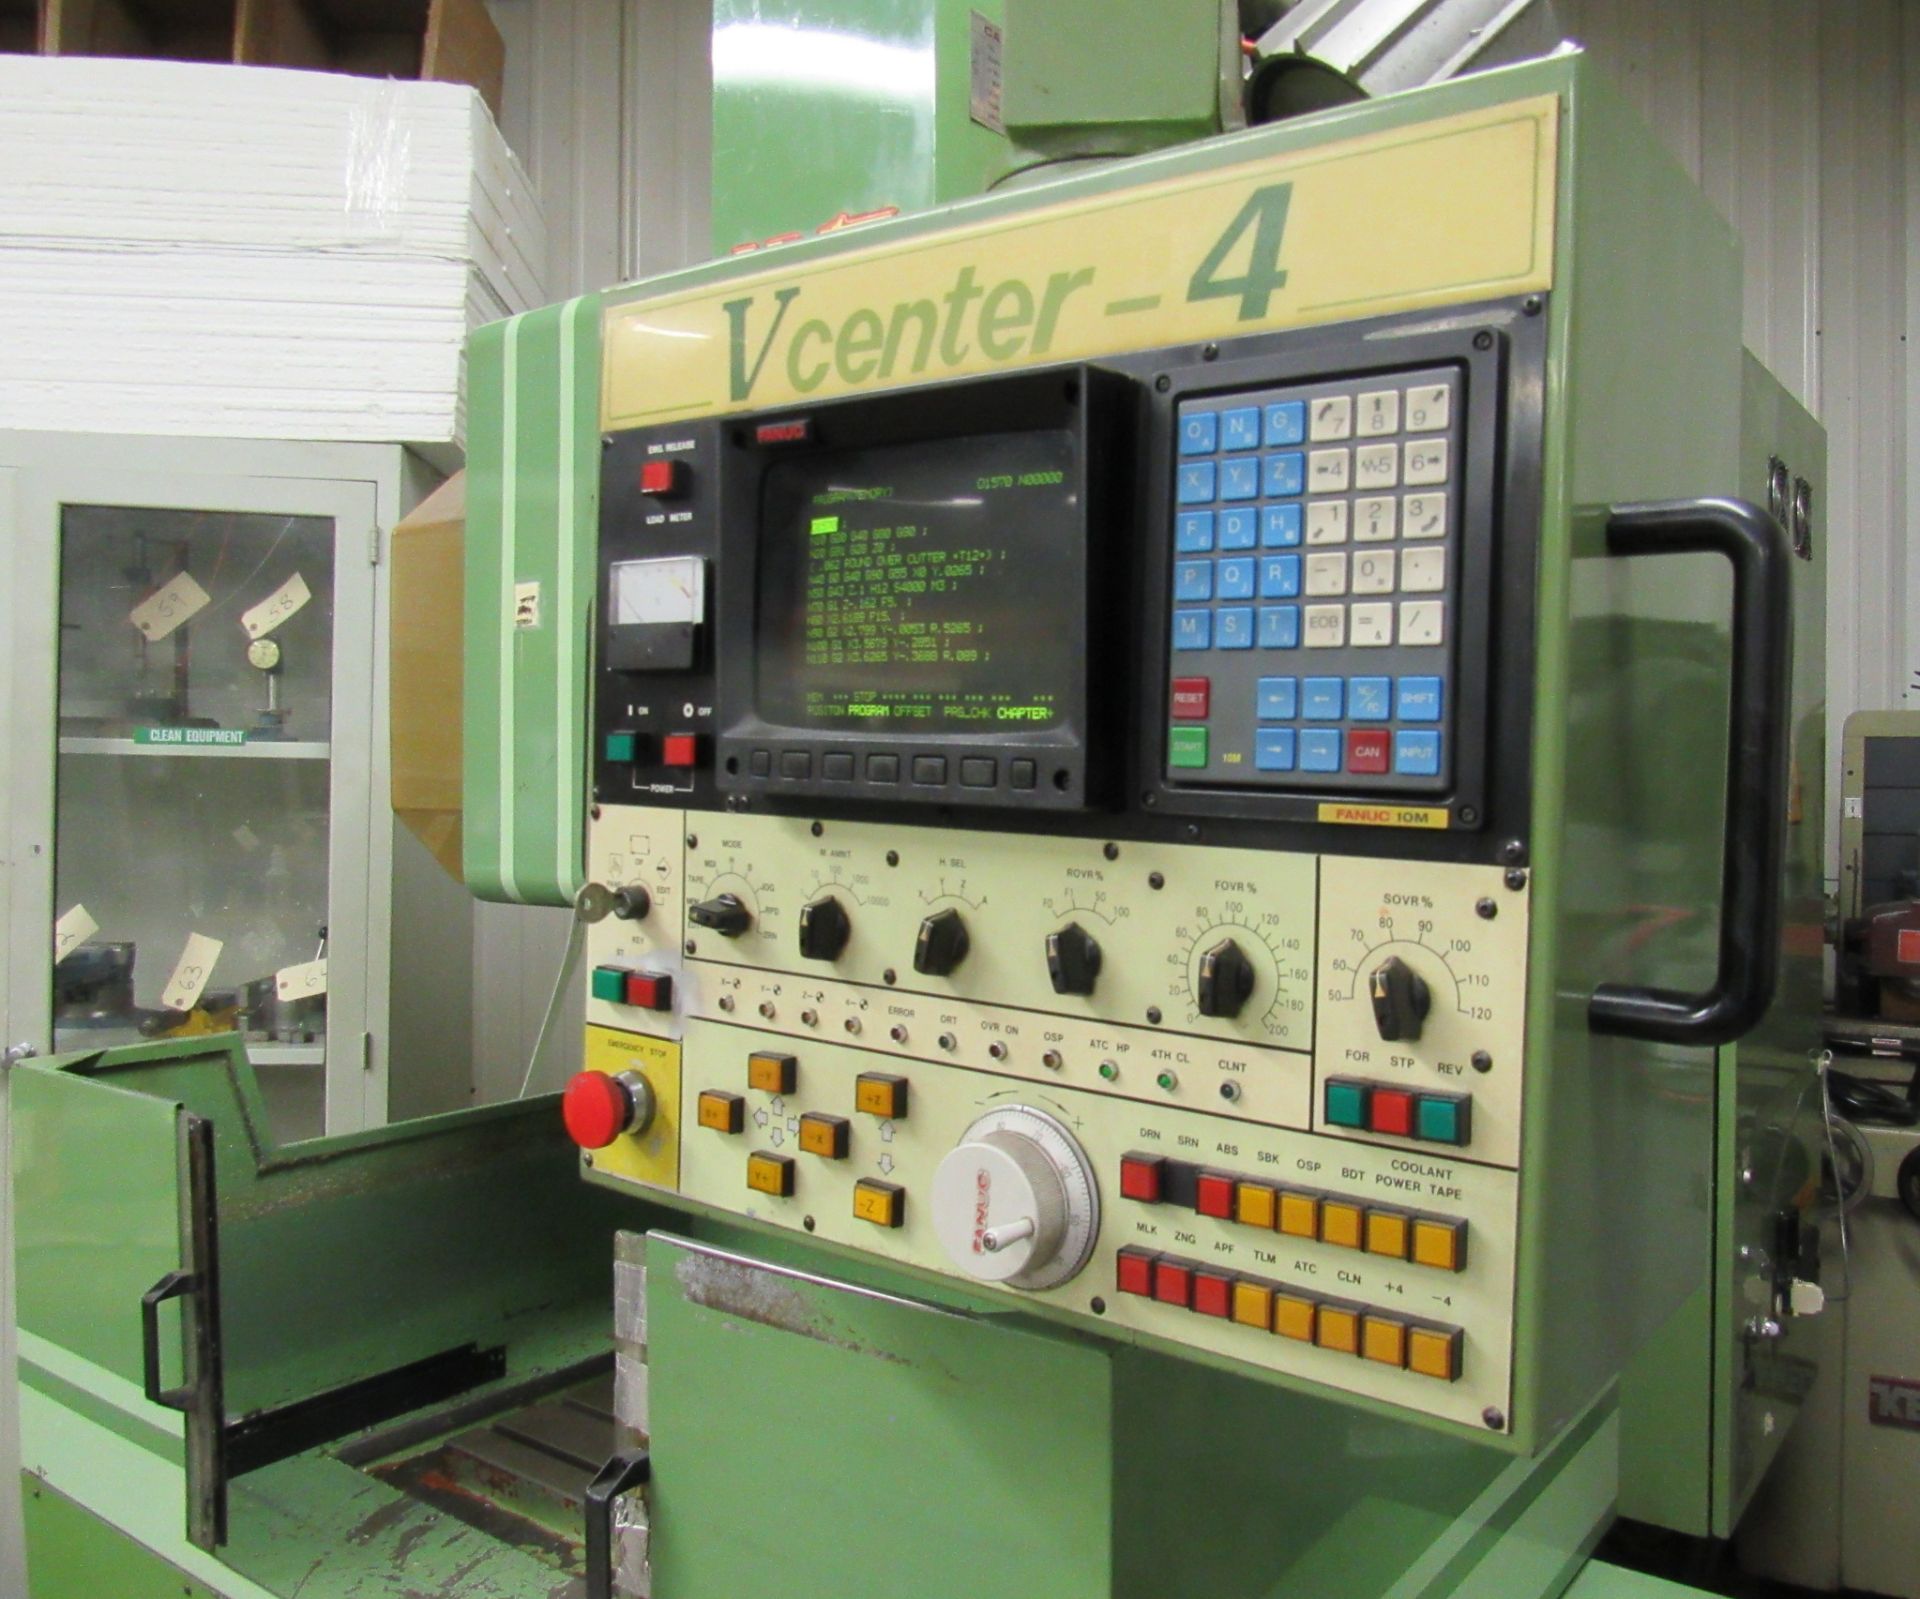 Victor Mod.V- Center 4 Vertical 3- Axis CNC Vertical Machining Center - Image 3 of 6